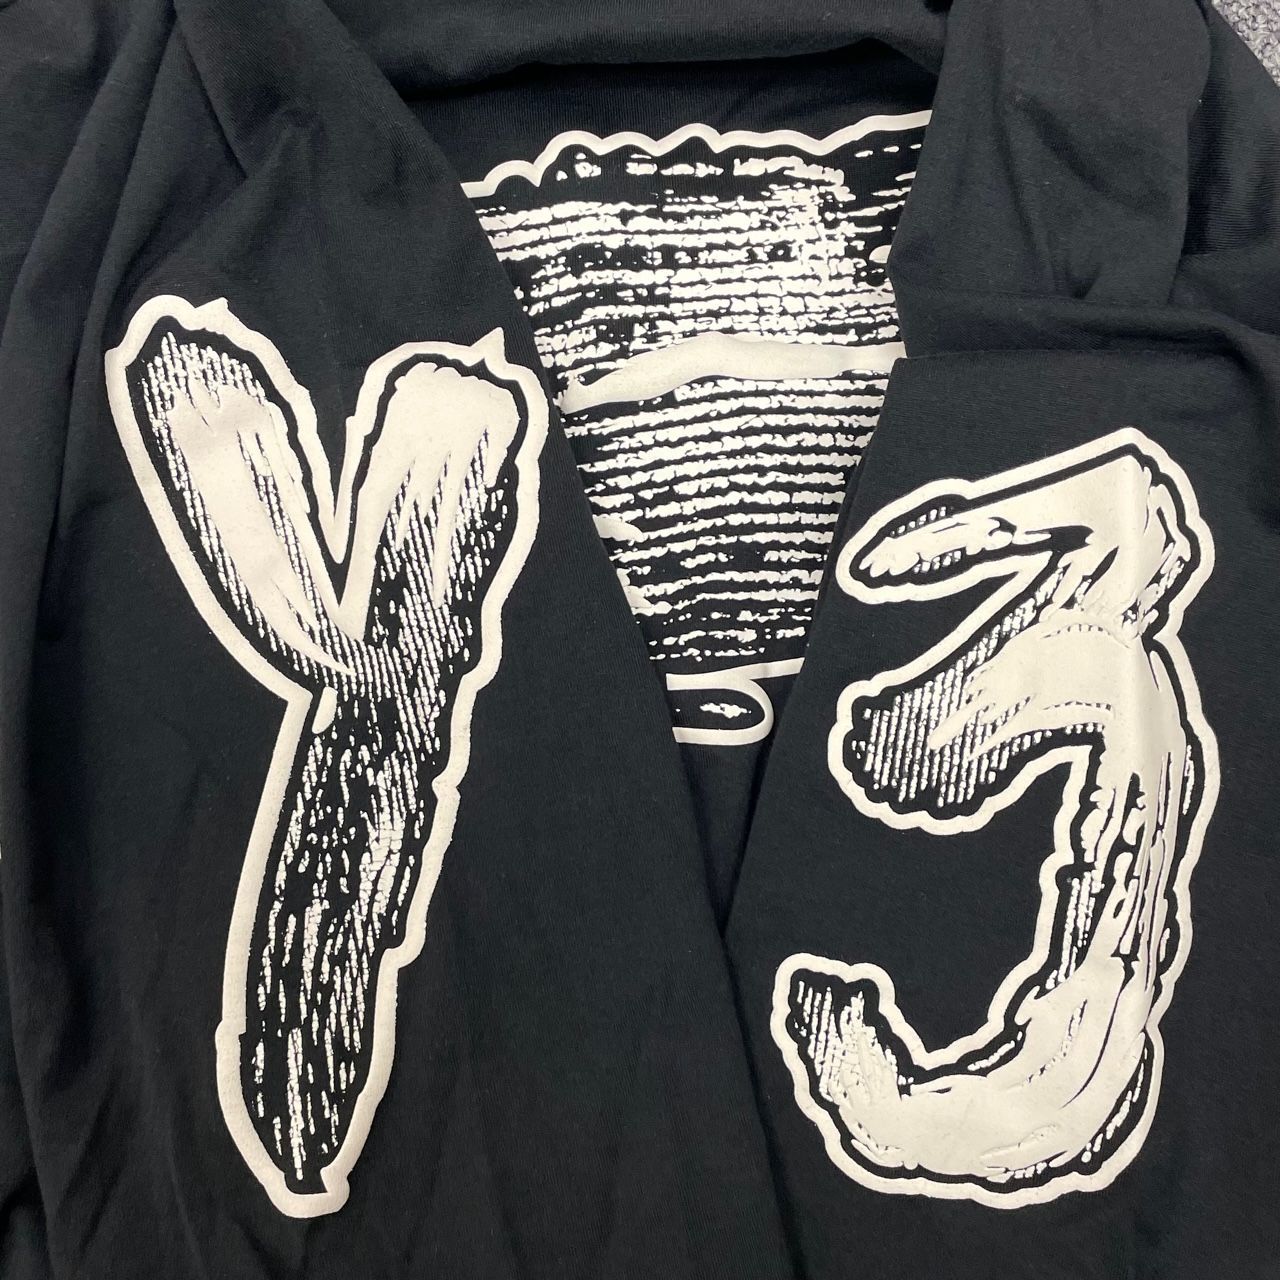 Y-3 23SS GRAPHIC LOGO LONG SLEEVE TEE グラフィック プリント クルーネック カットソー Tシャツ ワイスリー XS